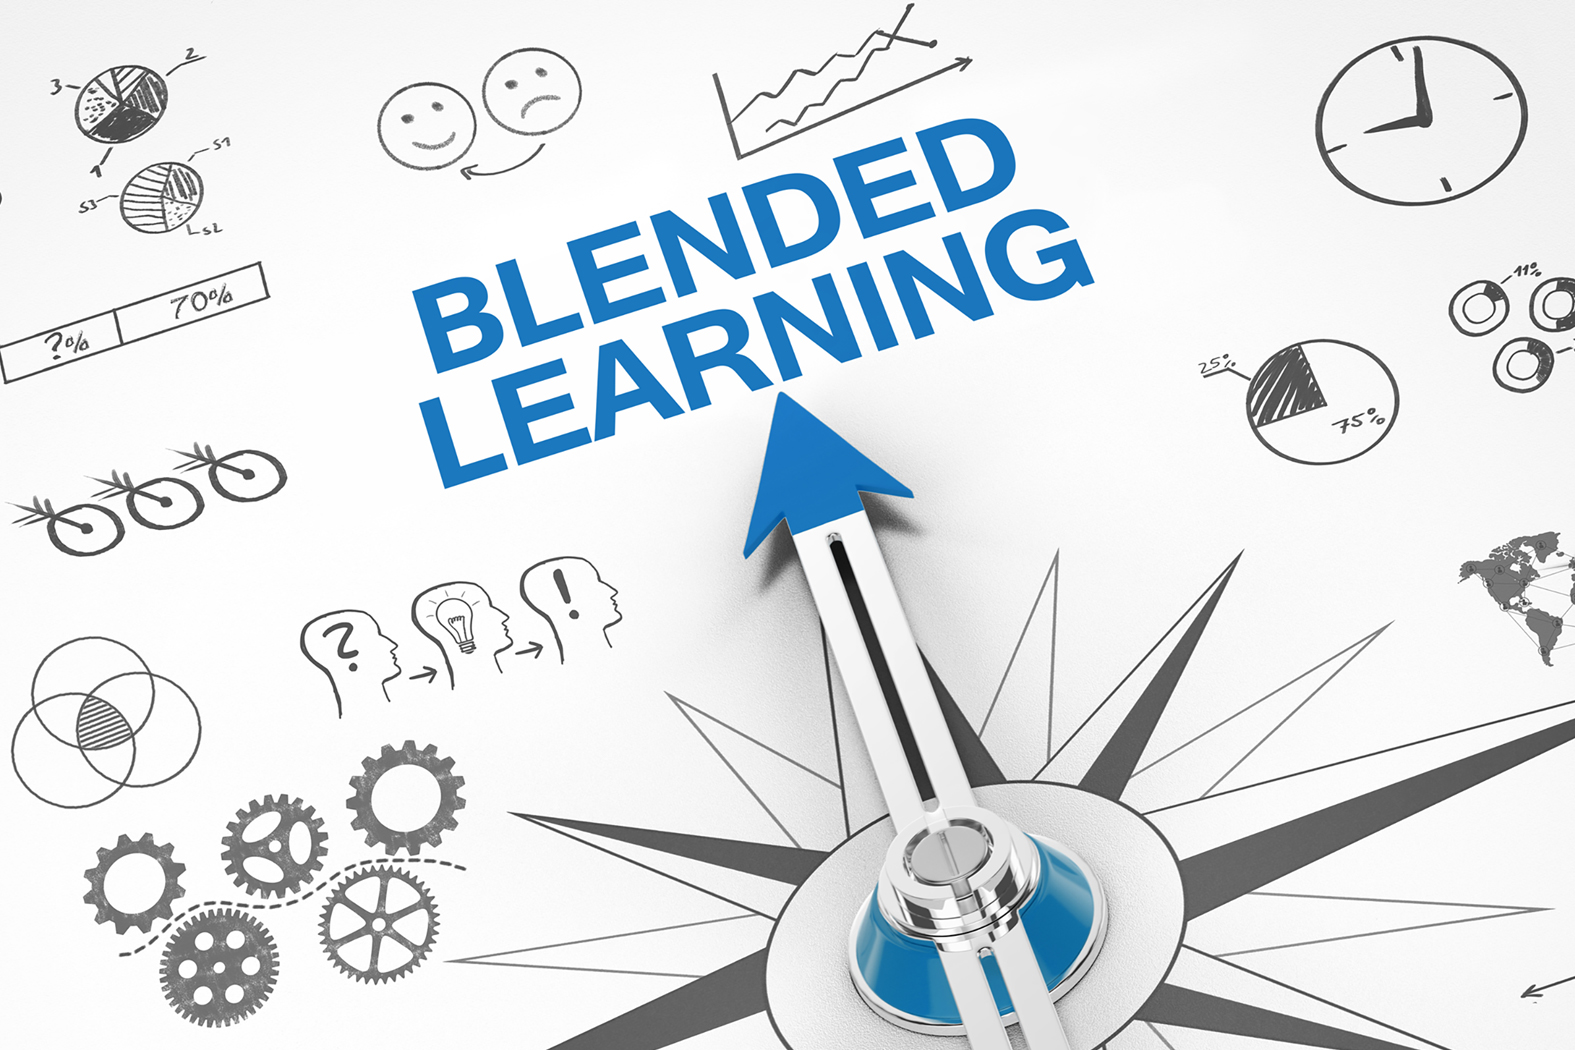 Image Blended Learning / Compass © Coloures-Pic | adobestock.com